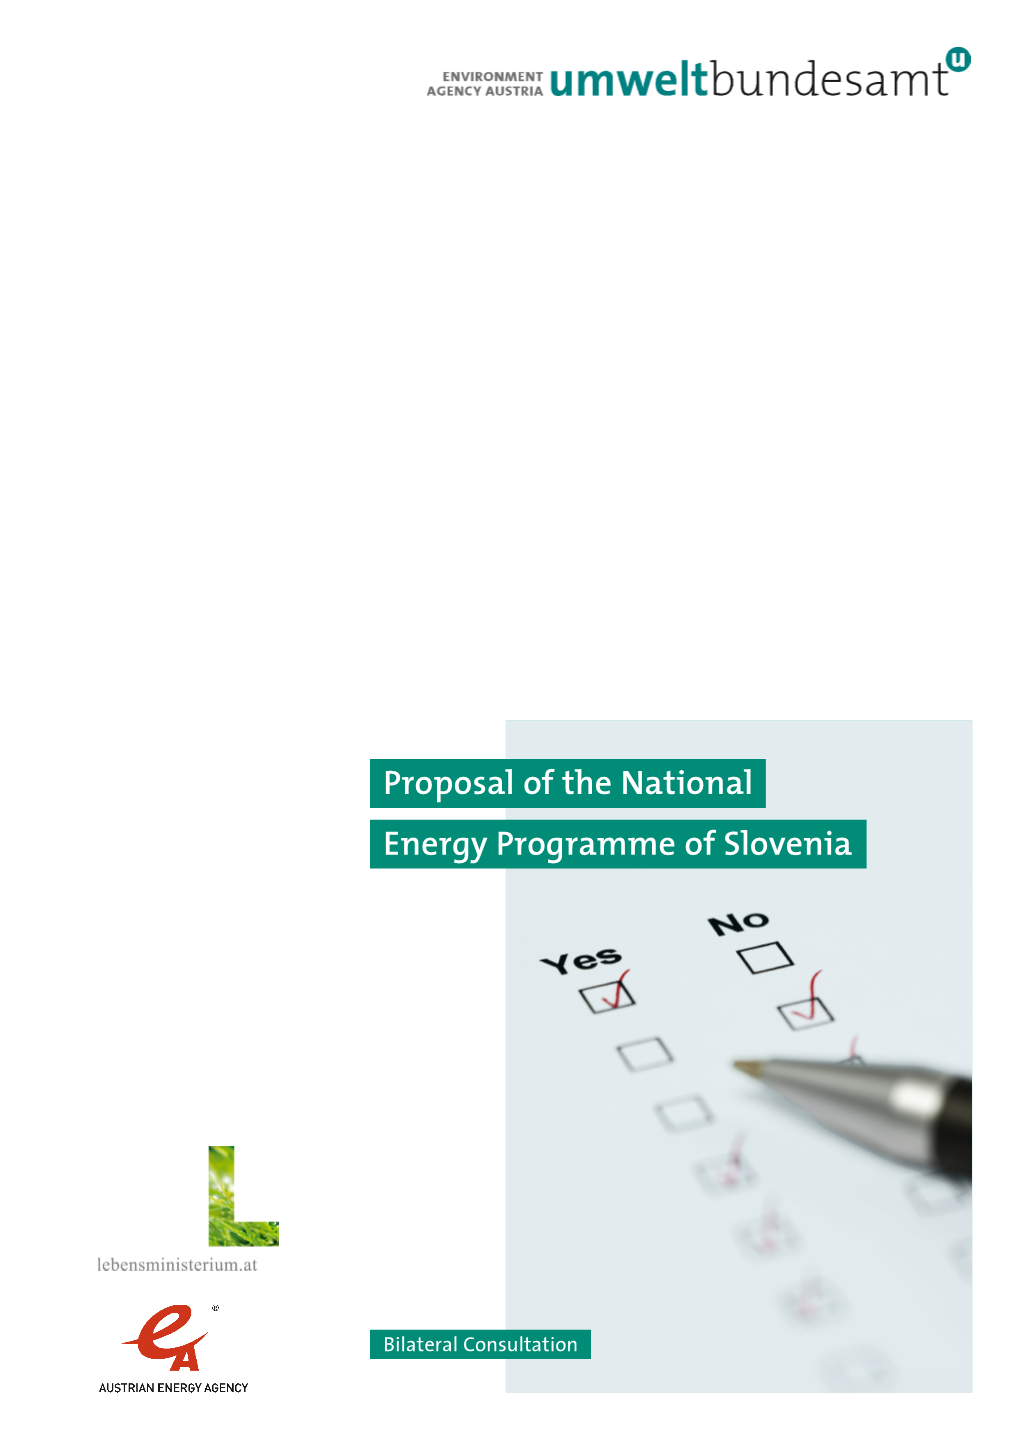 Proposal of the National Energy Programme of Slovenia